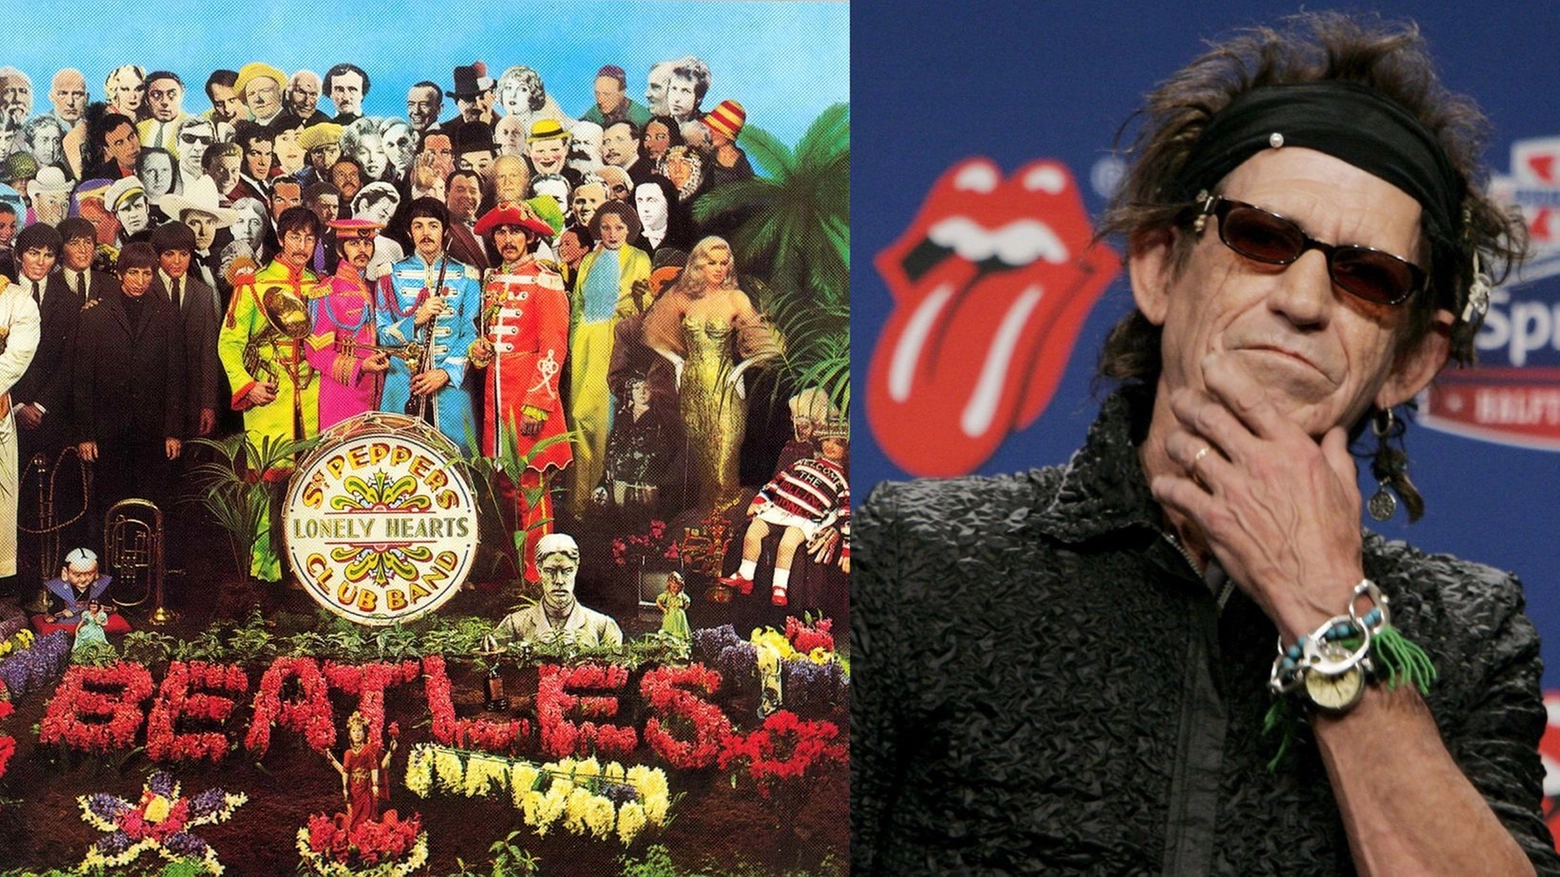 L'album dei Beatles "Sgt Pepper's Lonely Hearts Club Band" e Keith Richards